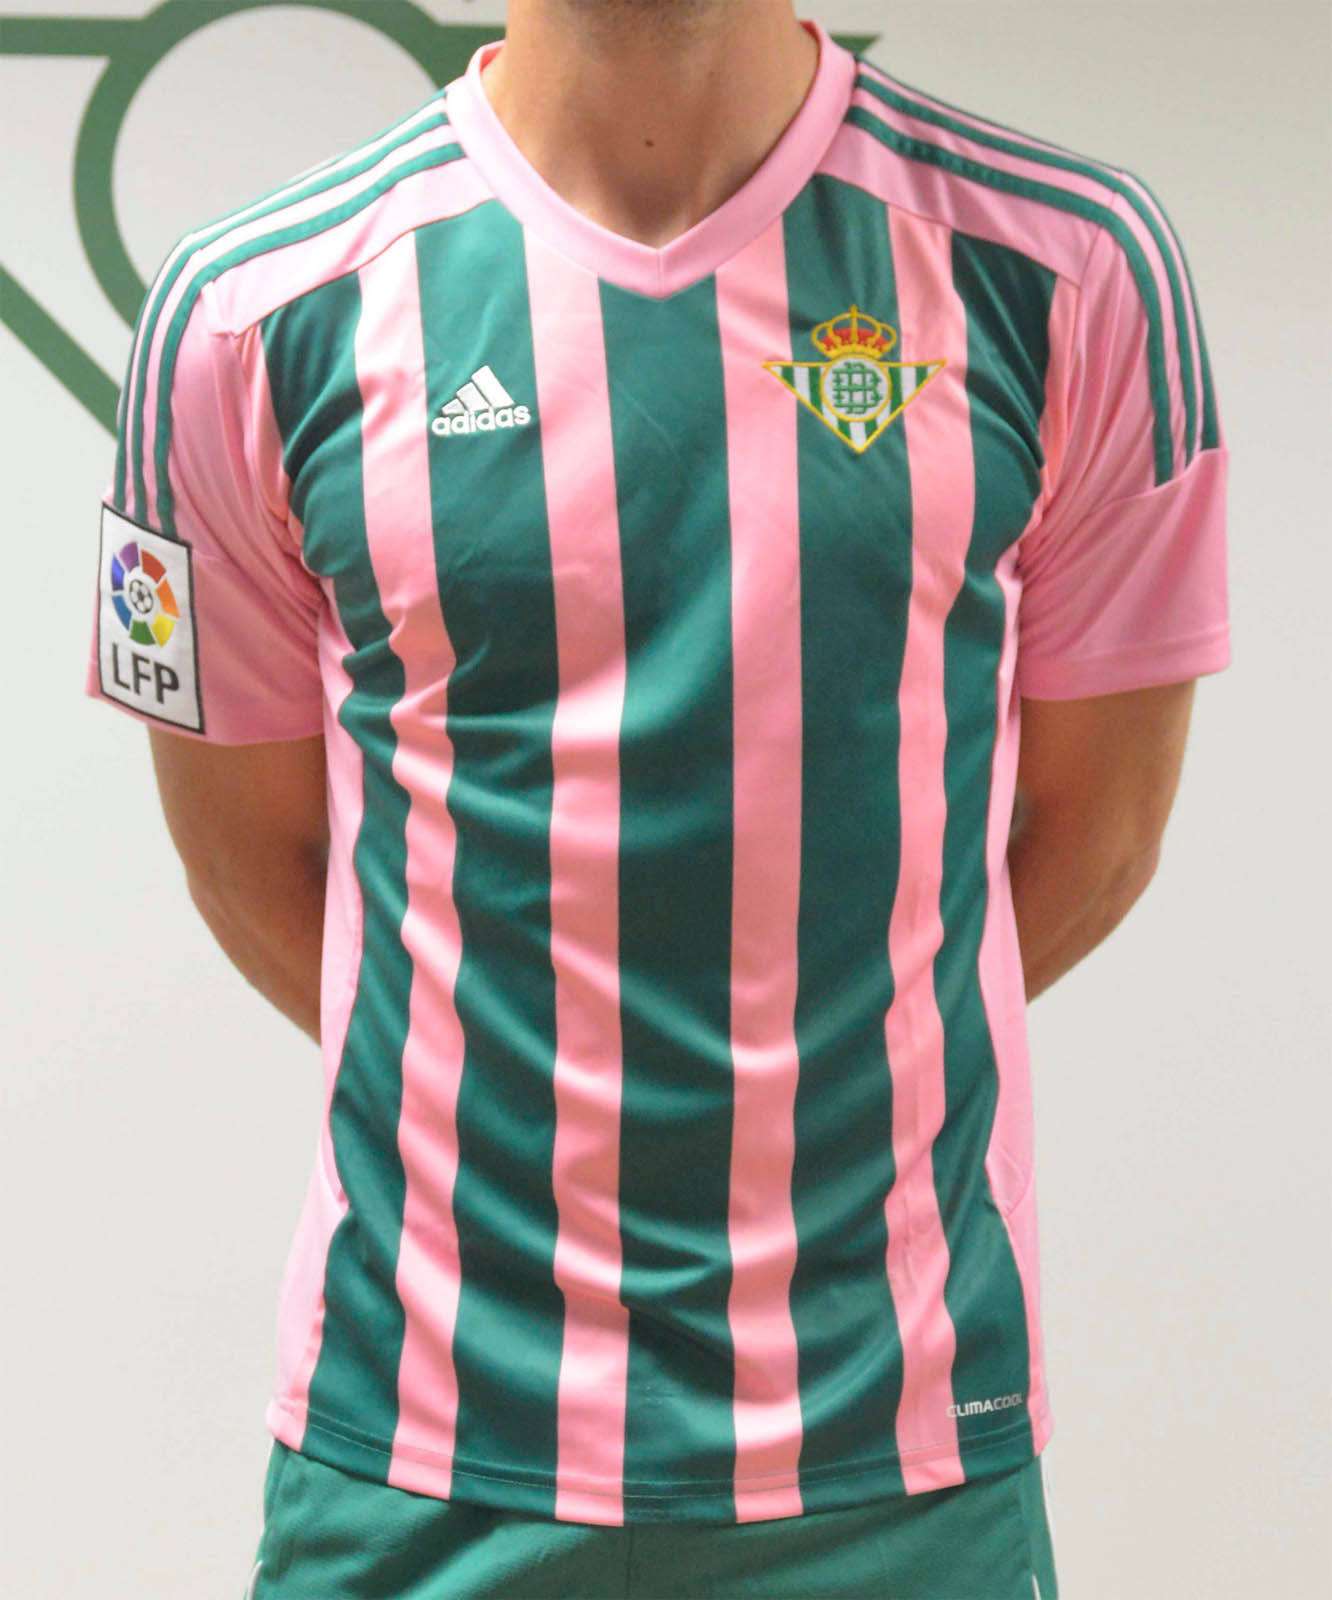 Kit Clash? Real Betis Debuts Special Pink and Green Kit - Footy Headlines